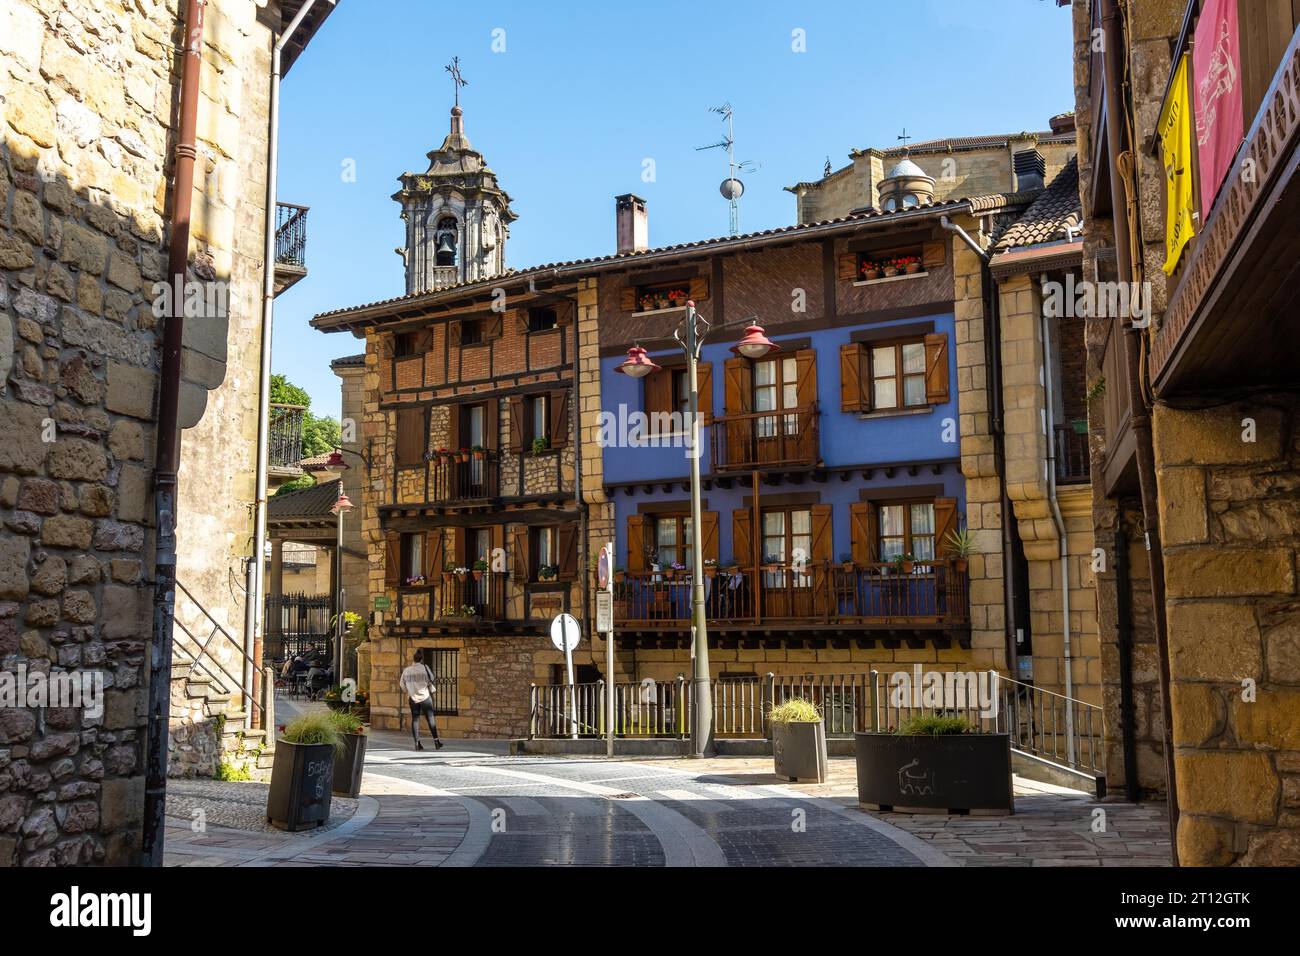 Old town of the municipality of Lezo, the small coastal town in the province of Gipuzkoa, Basque Country. Spain Stock Photo